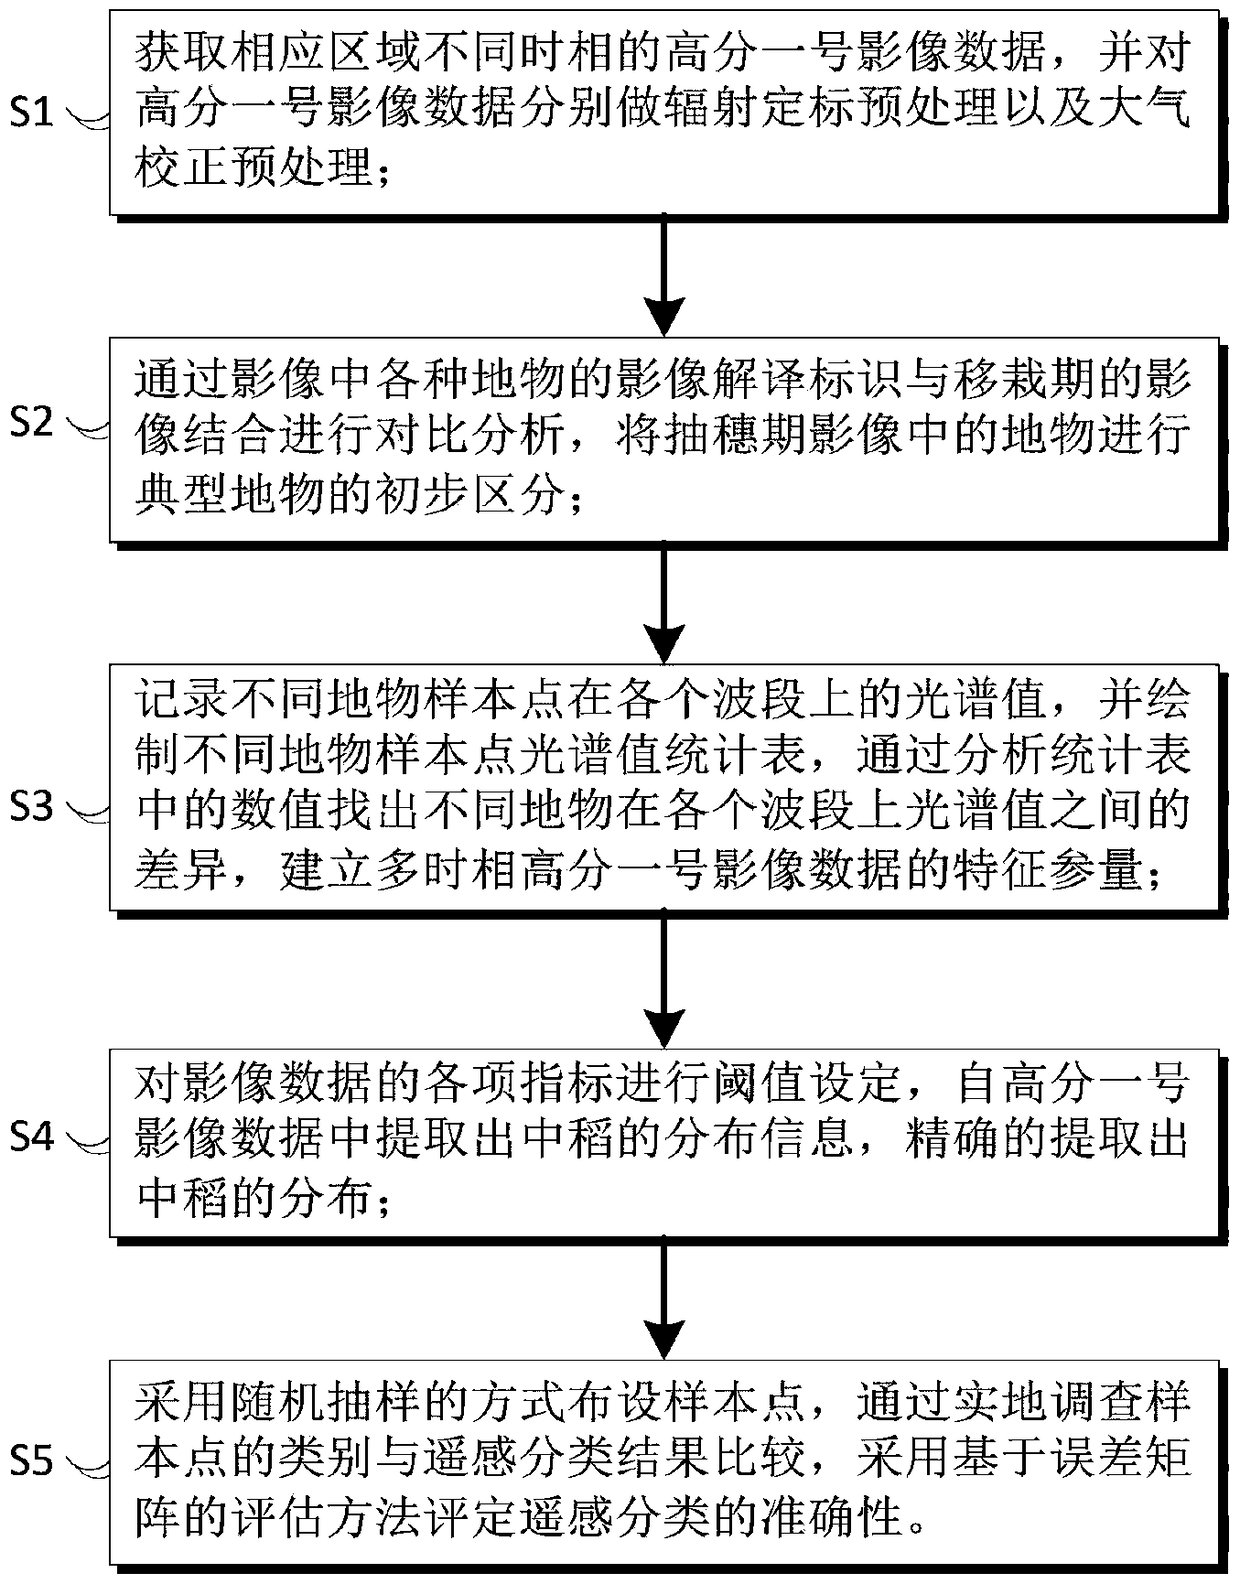 A decision tree classification method for middle rice information based on feature extraction from multi-temporal data